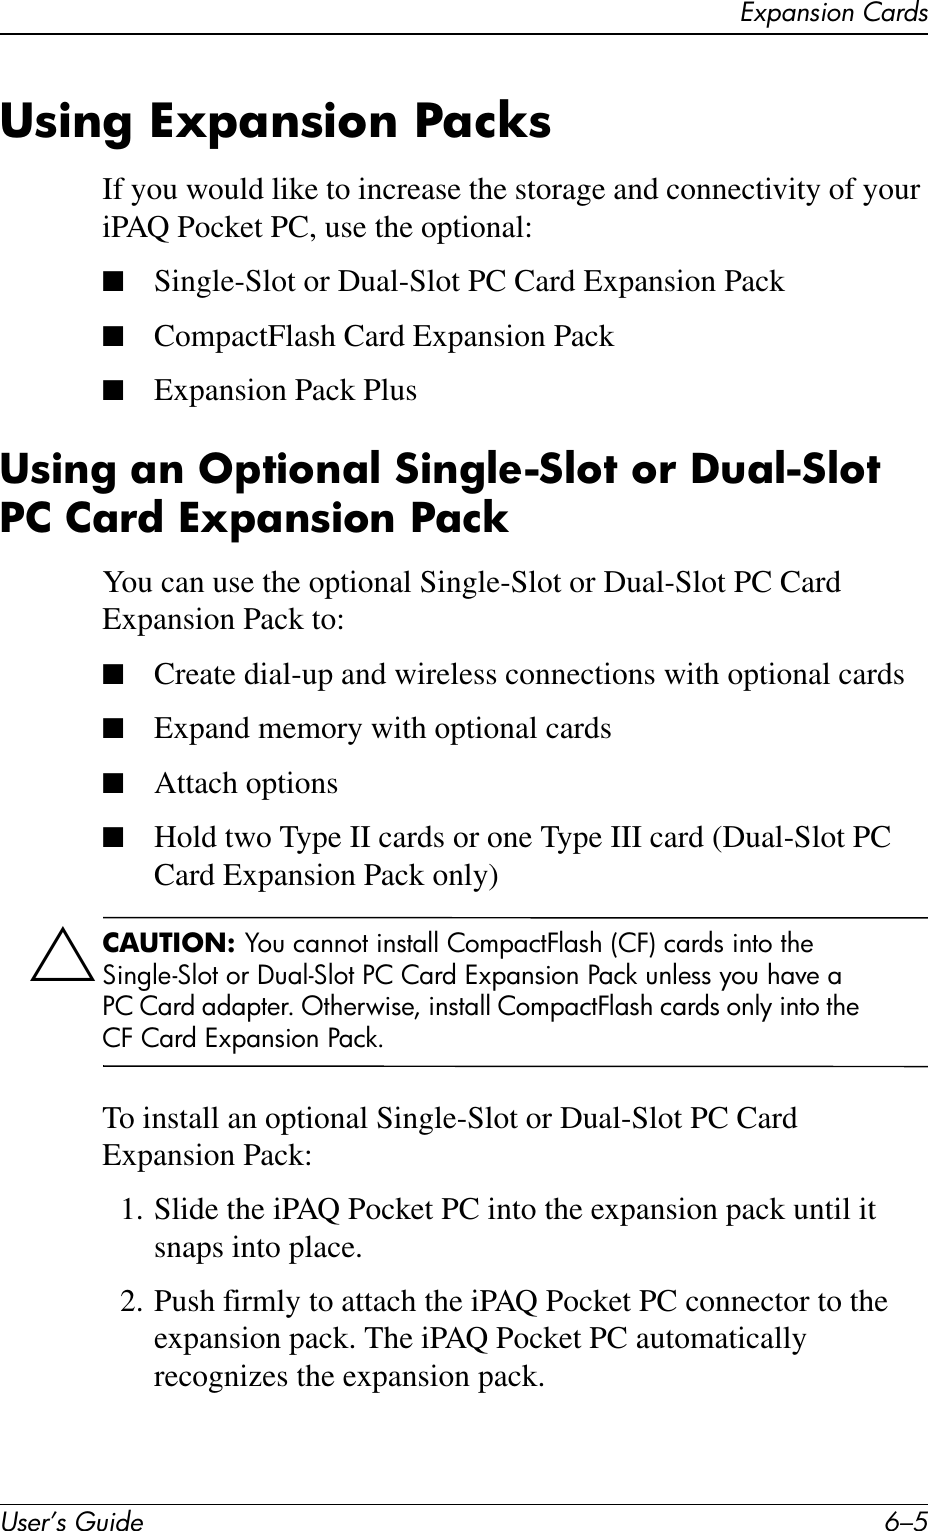 Expansion CardsUser’s Guide 6–5Using Expansion PacksIf you would like to increase the storage and connectivity of your iPAQ Pocket PC, use the optional:■Single-Slot or Dual-Slot PC Card Expansion Pack■CompactFlash Card Expansion Pack■Expansion Pack PlusUsing an Optional Single-Slot or Dual-Slot PC Card Expansion PackYou can use the optional Single-Slot or Dual-Slot PC Card Expansion Pack to:■Create dial-up and wireless connections with optional cards■Expand memory with optional cards■Attach options■Hold two Type II cards or one Type III card (Dual-Slot PC Card Expansion Pack only)ÄCAUTION: You cannot install CompactFlash (CF) cards into the Single-Slot or Dual-Slot PC Card Expansion Pack unless you have a PC Card adapter. Otherwise, install CompactFlash cards only into the CF Card Expansion Pack.To install an optional Single-Slot or Dual-Slot PC Card Expansion Pack:1. Slide the iPAQ Pocket PC into the expansion pack until it snaps into place.2. Push firmly to attach the iPAQ Pocket PC connector to the expansion pack. The iPAQ Pocket PC automatically recognizes the expansion pack.